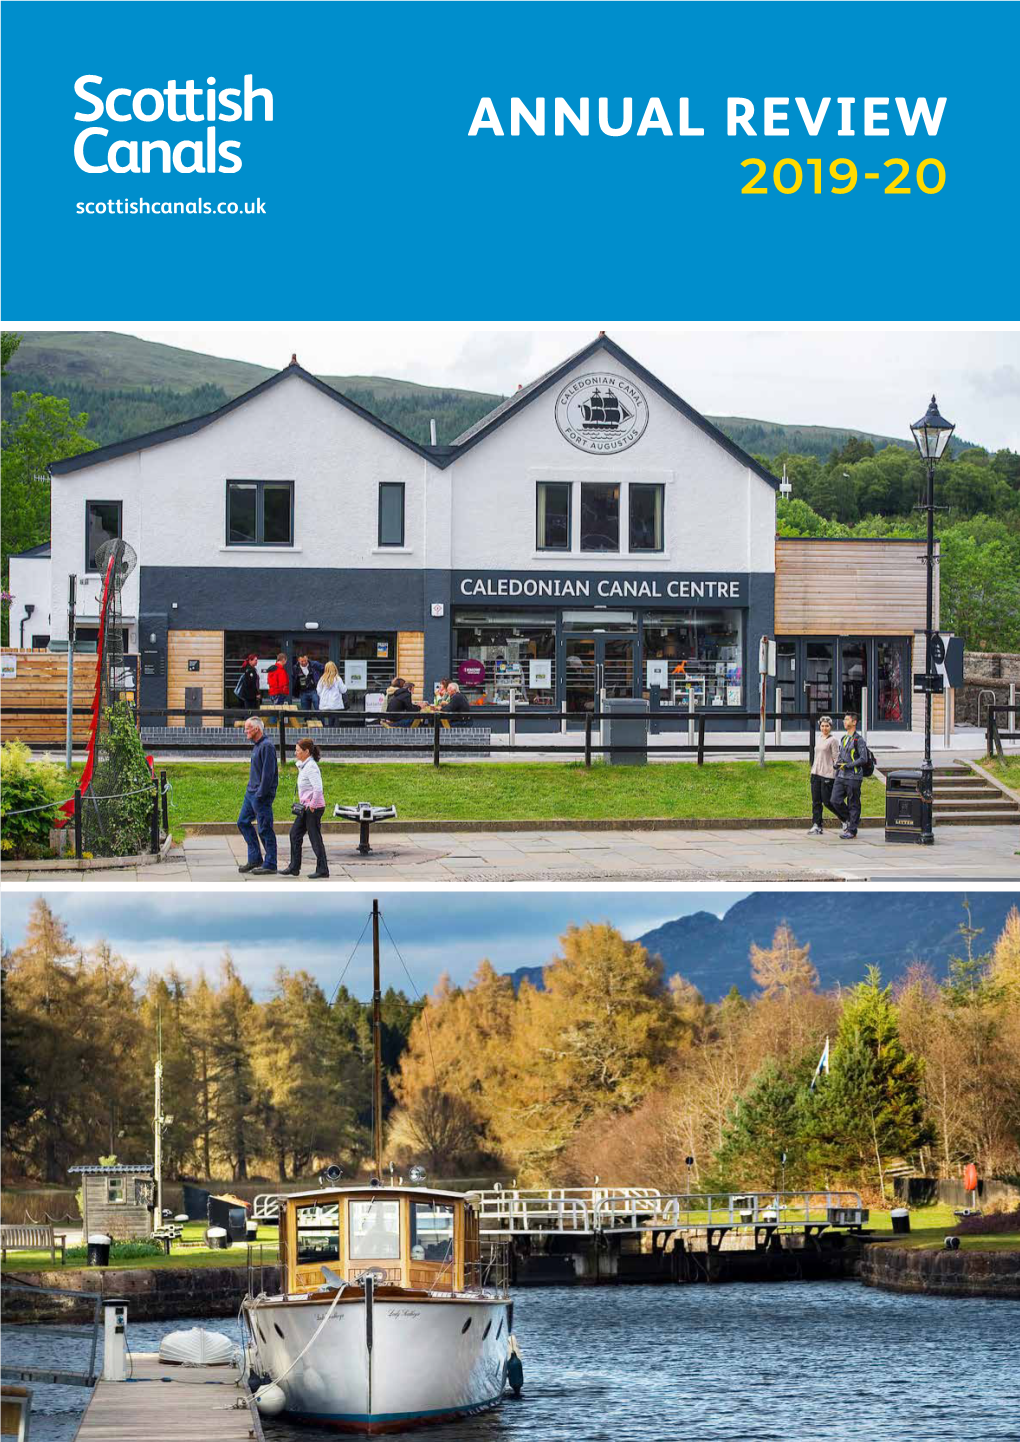 ANNUAL REVIEW 2019-20 Scottishcanals.Co.Uk Introduction